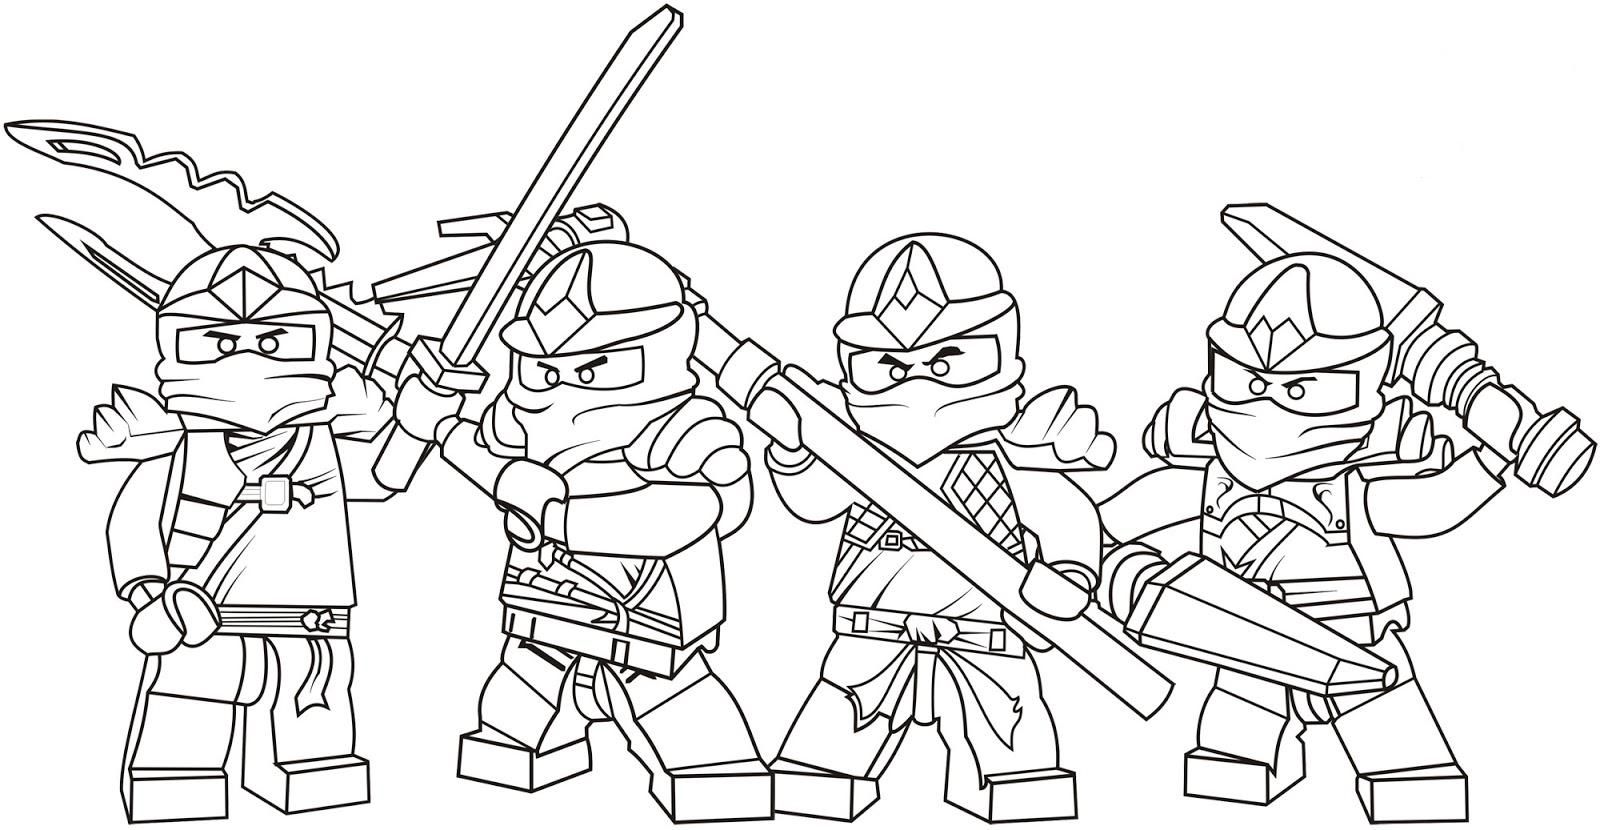 Kids Ninjago Coloring Pages | Cartoon Coloring pages of ...